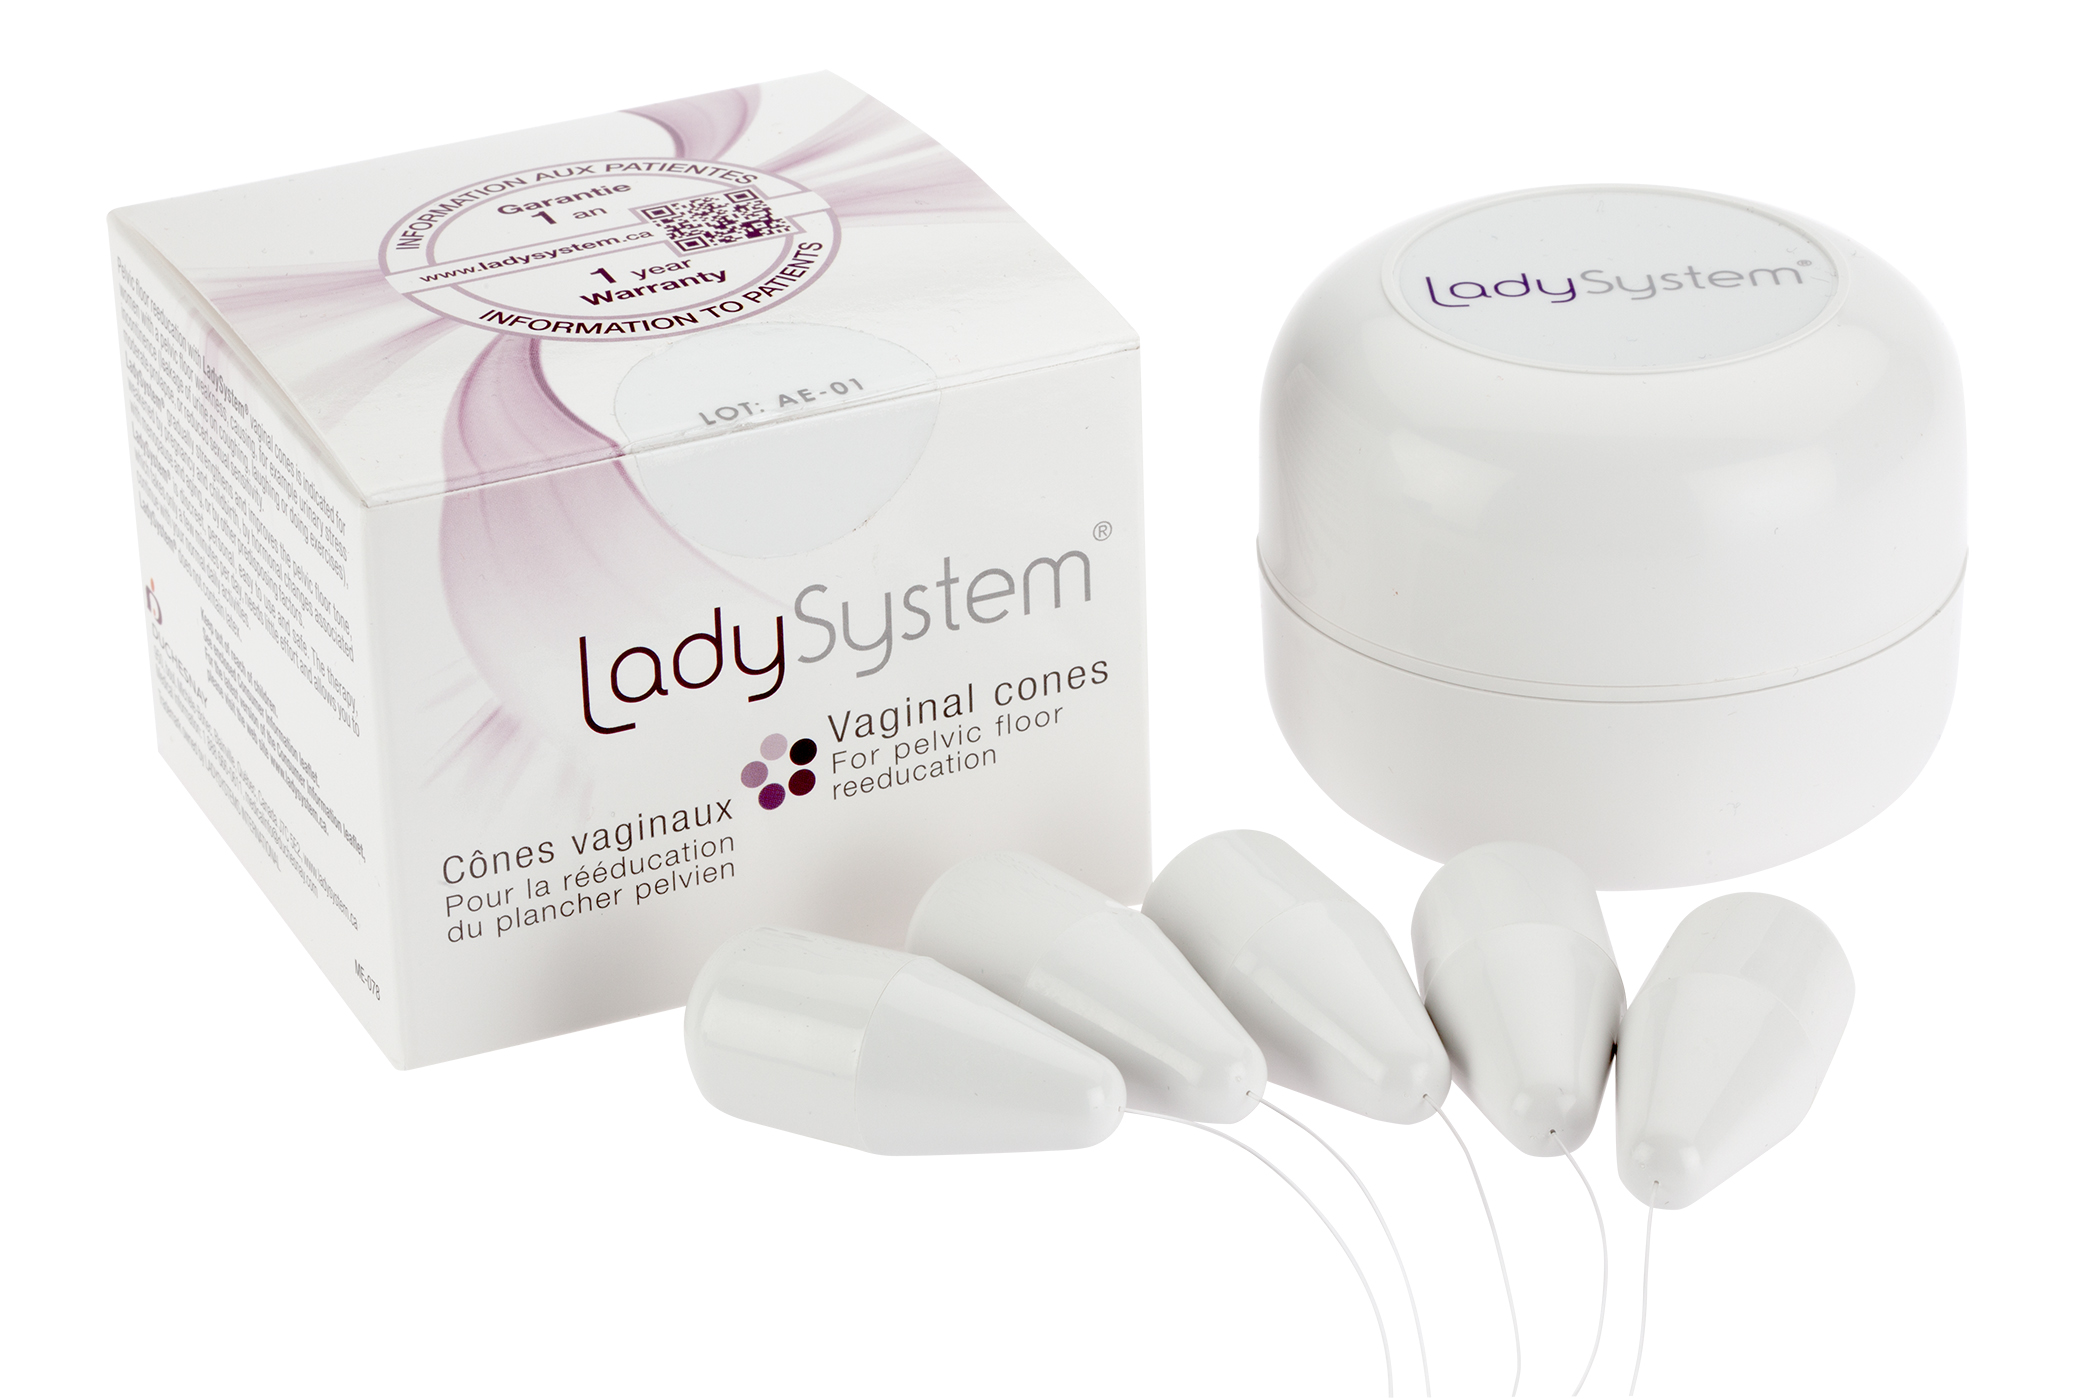 https://www.canadiancontinence.ca/images/LaydySystem_kit.jpg